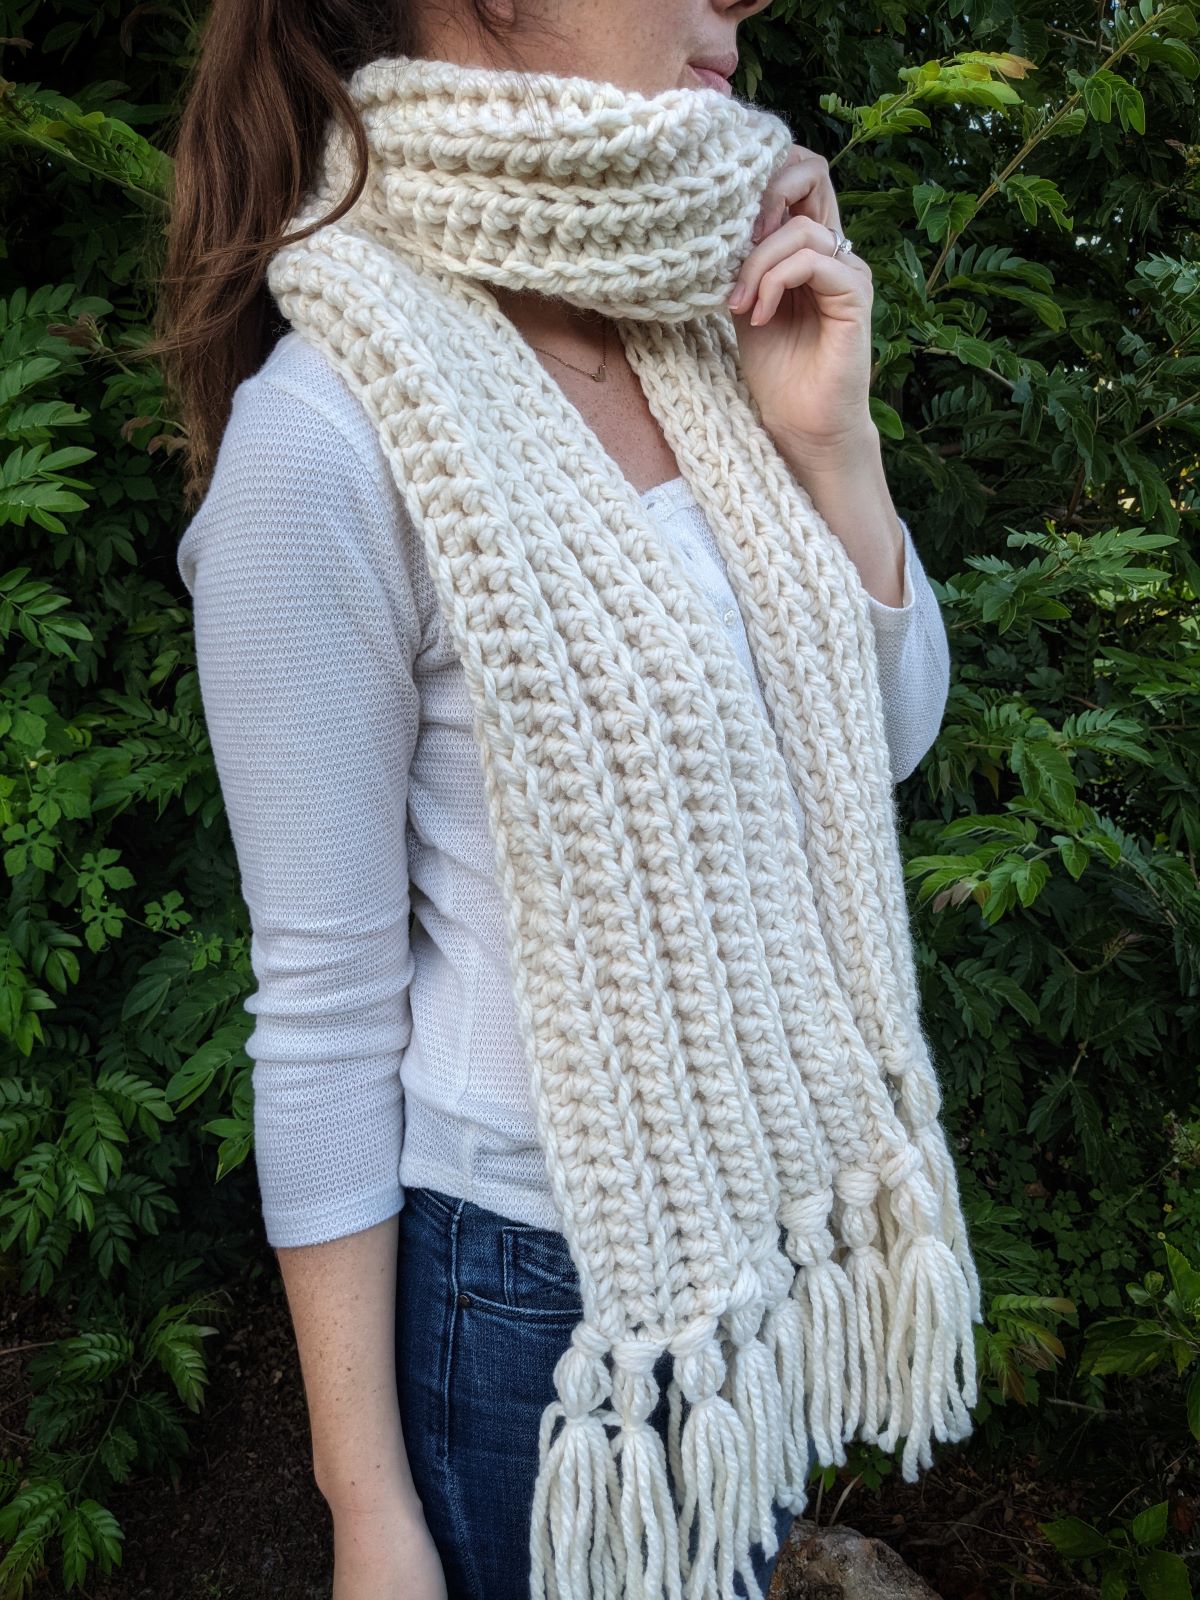 model is wearing a chunky natural colored crochet scarf with a pair of jeans and a long sleeve top